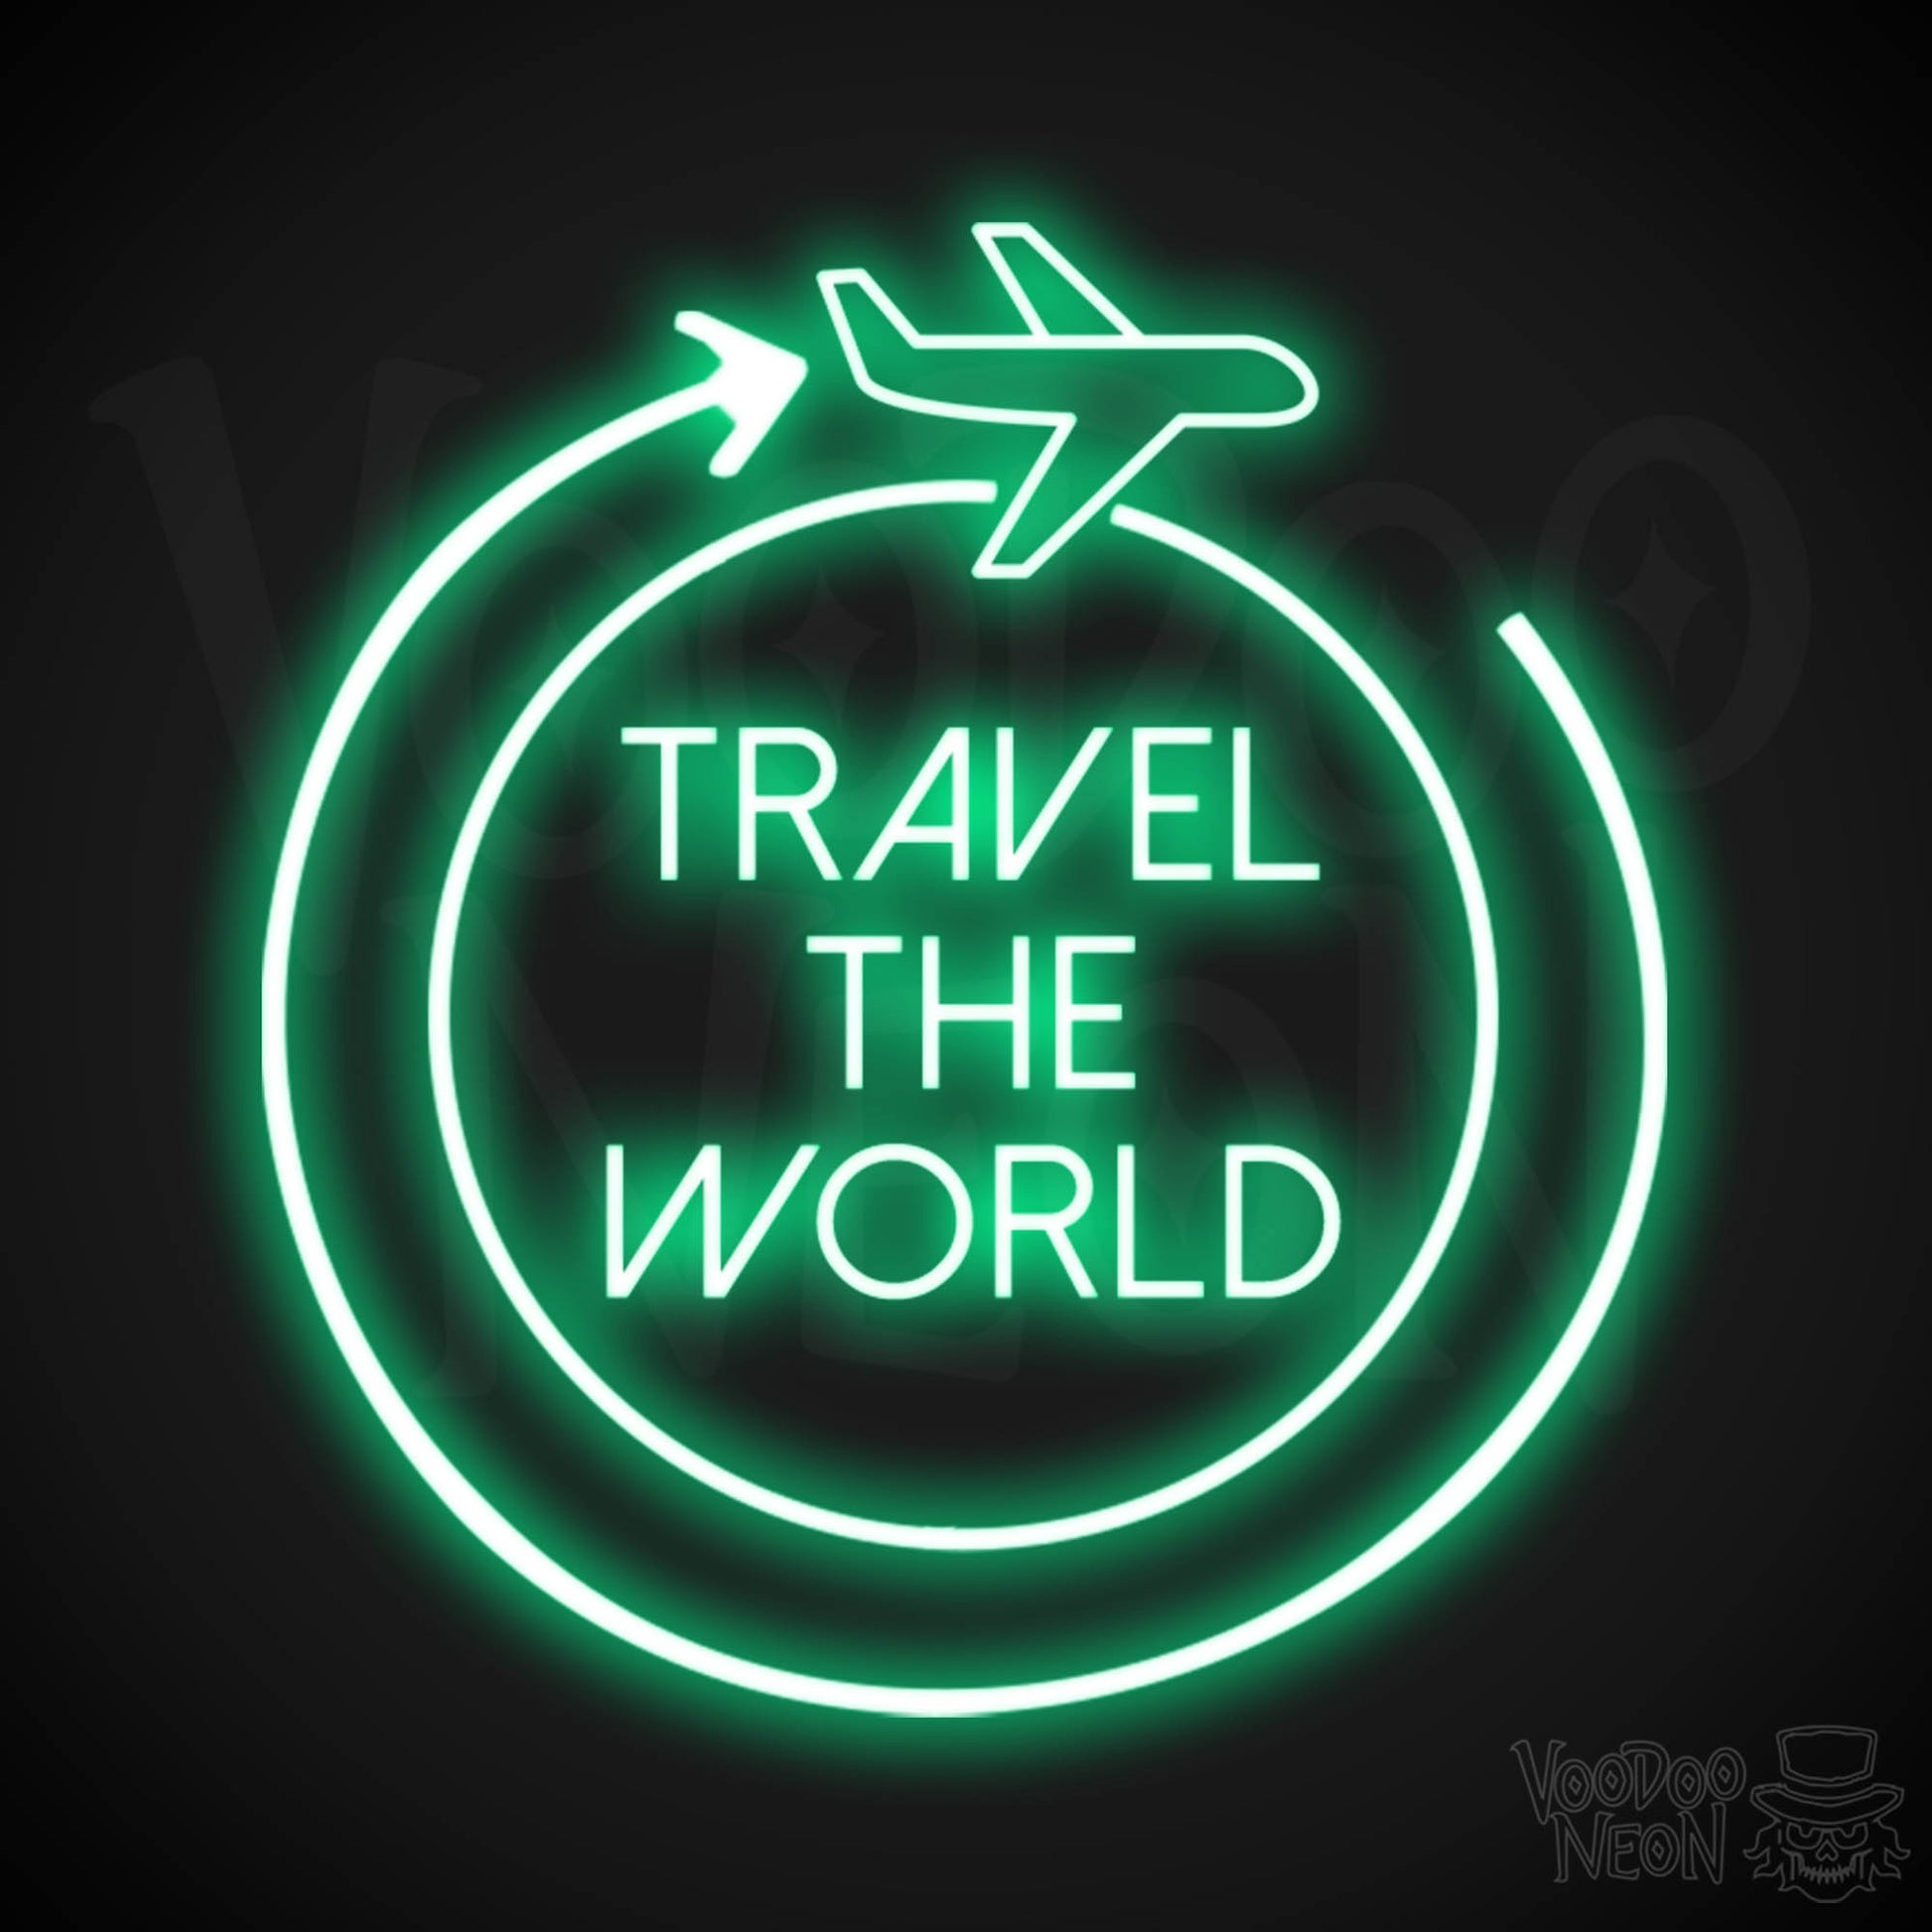 Let's Travel The World Neon Sign - LED Neon Wall Art - Color Green